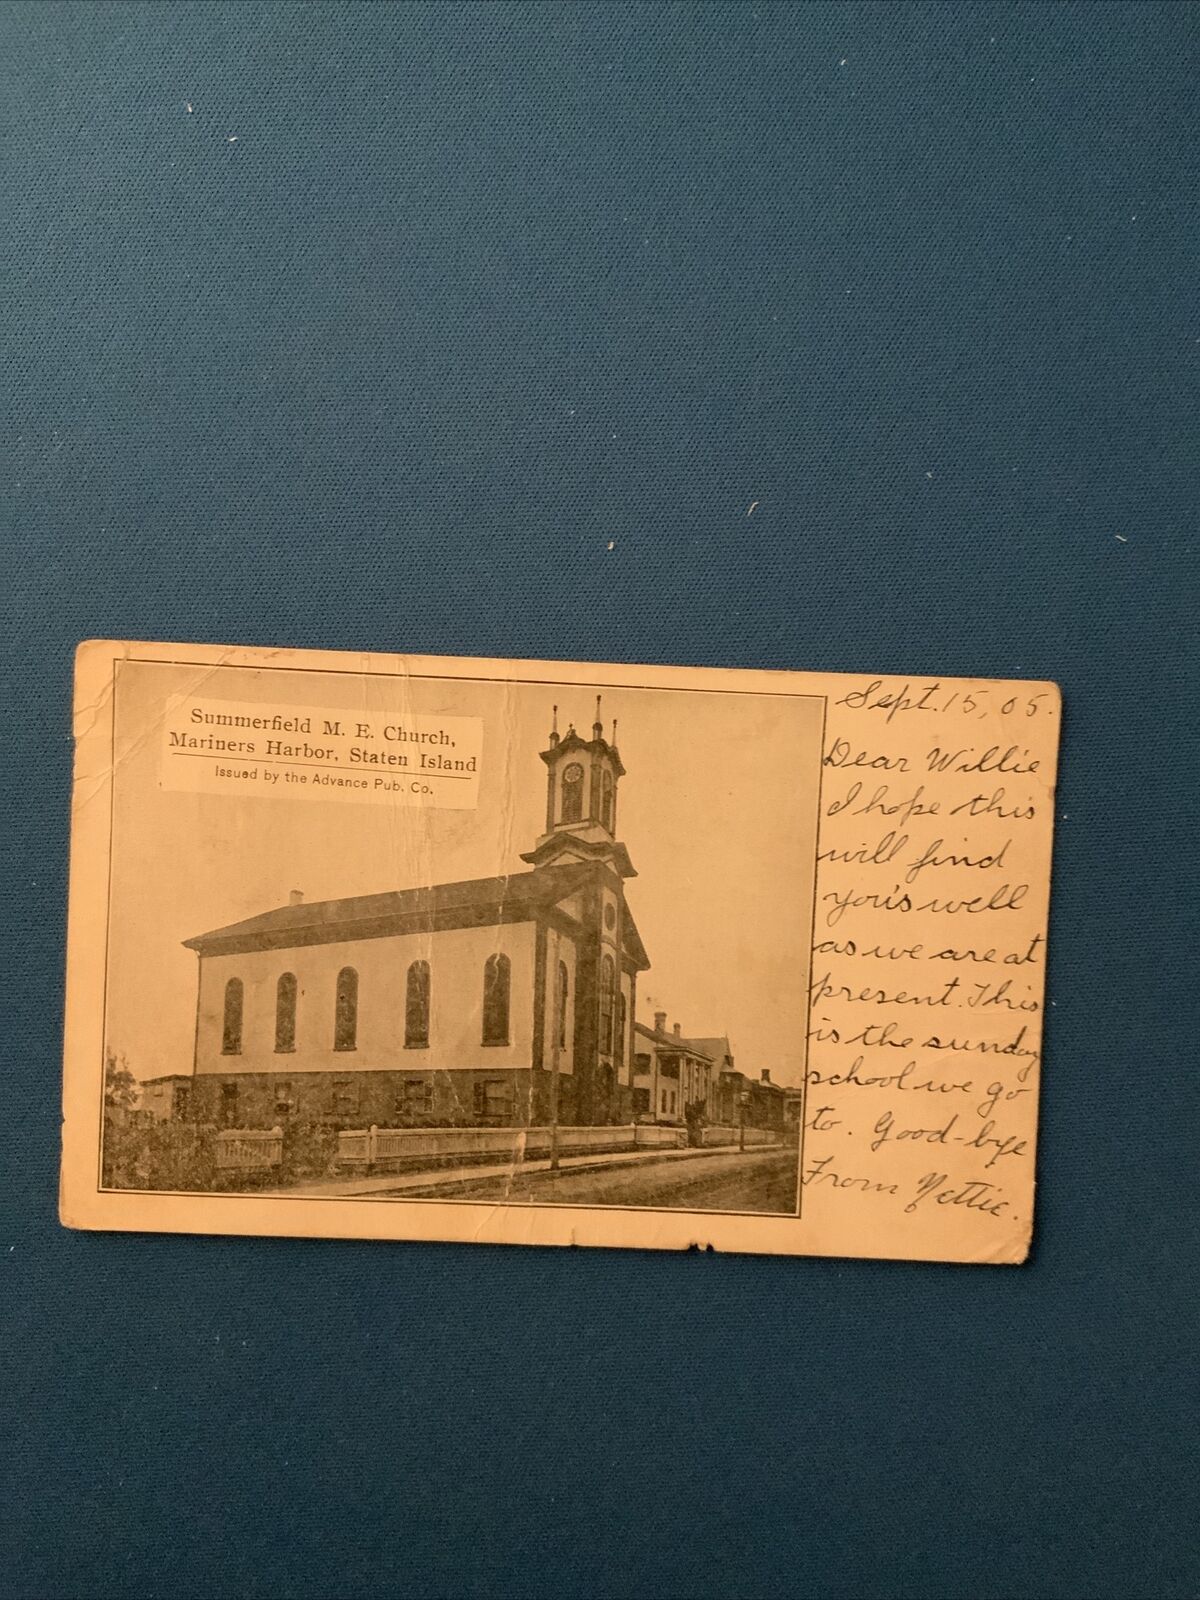 Summerfield M.E. Church Mariners Harbor, Staten Island, N.Y..Posted 1905